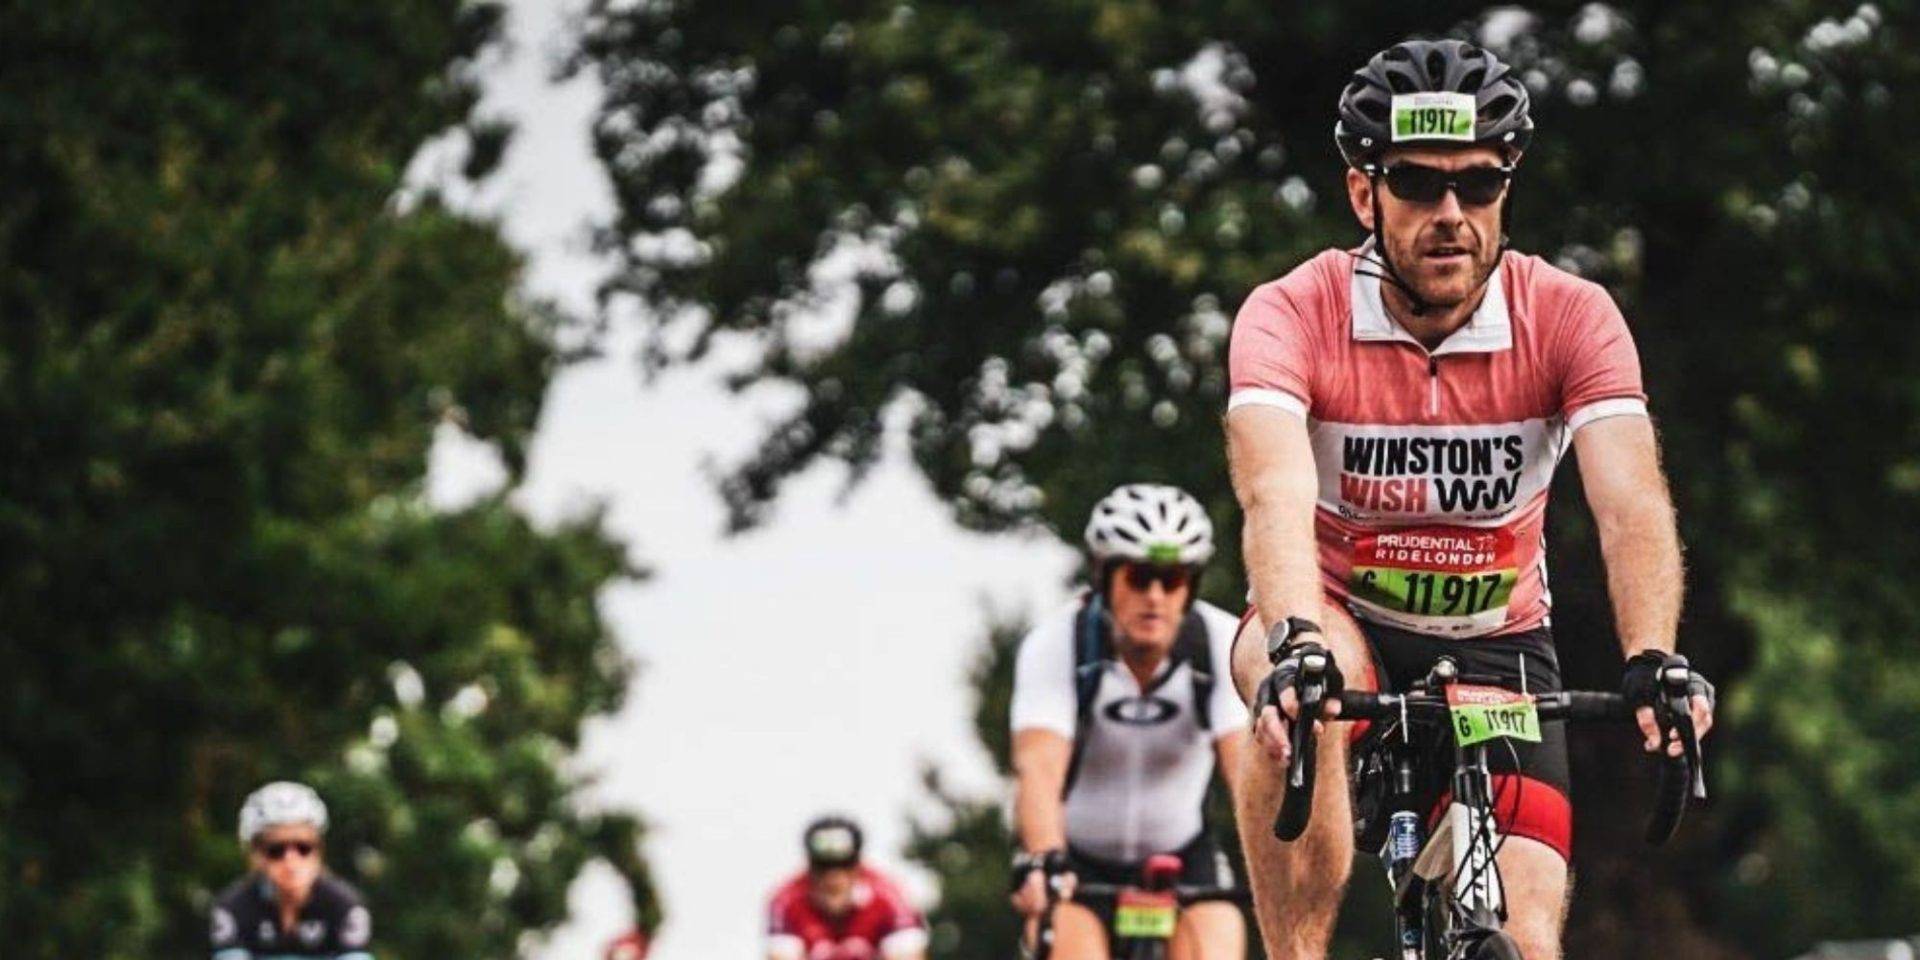 Russ brookes cycling for Winston's Wish in coral jersey